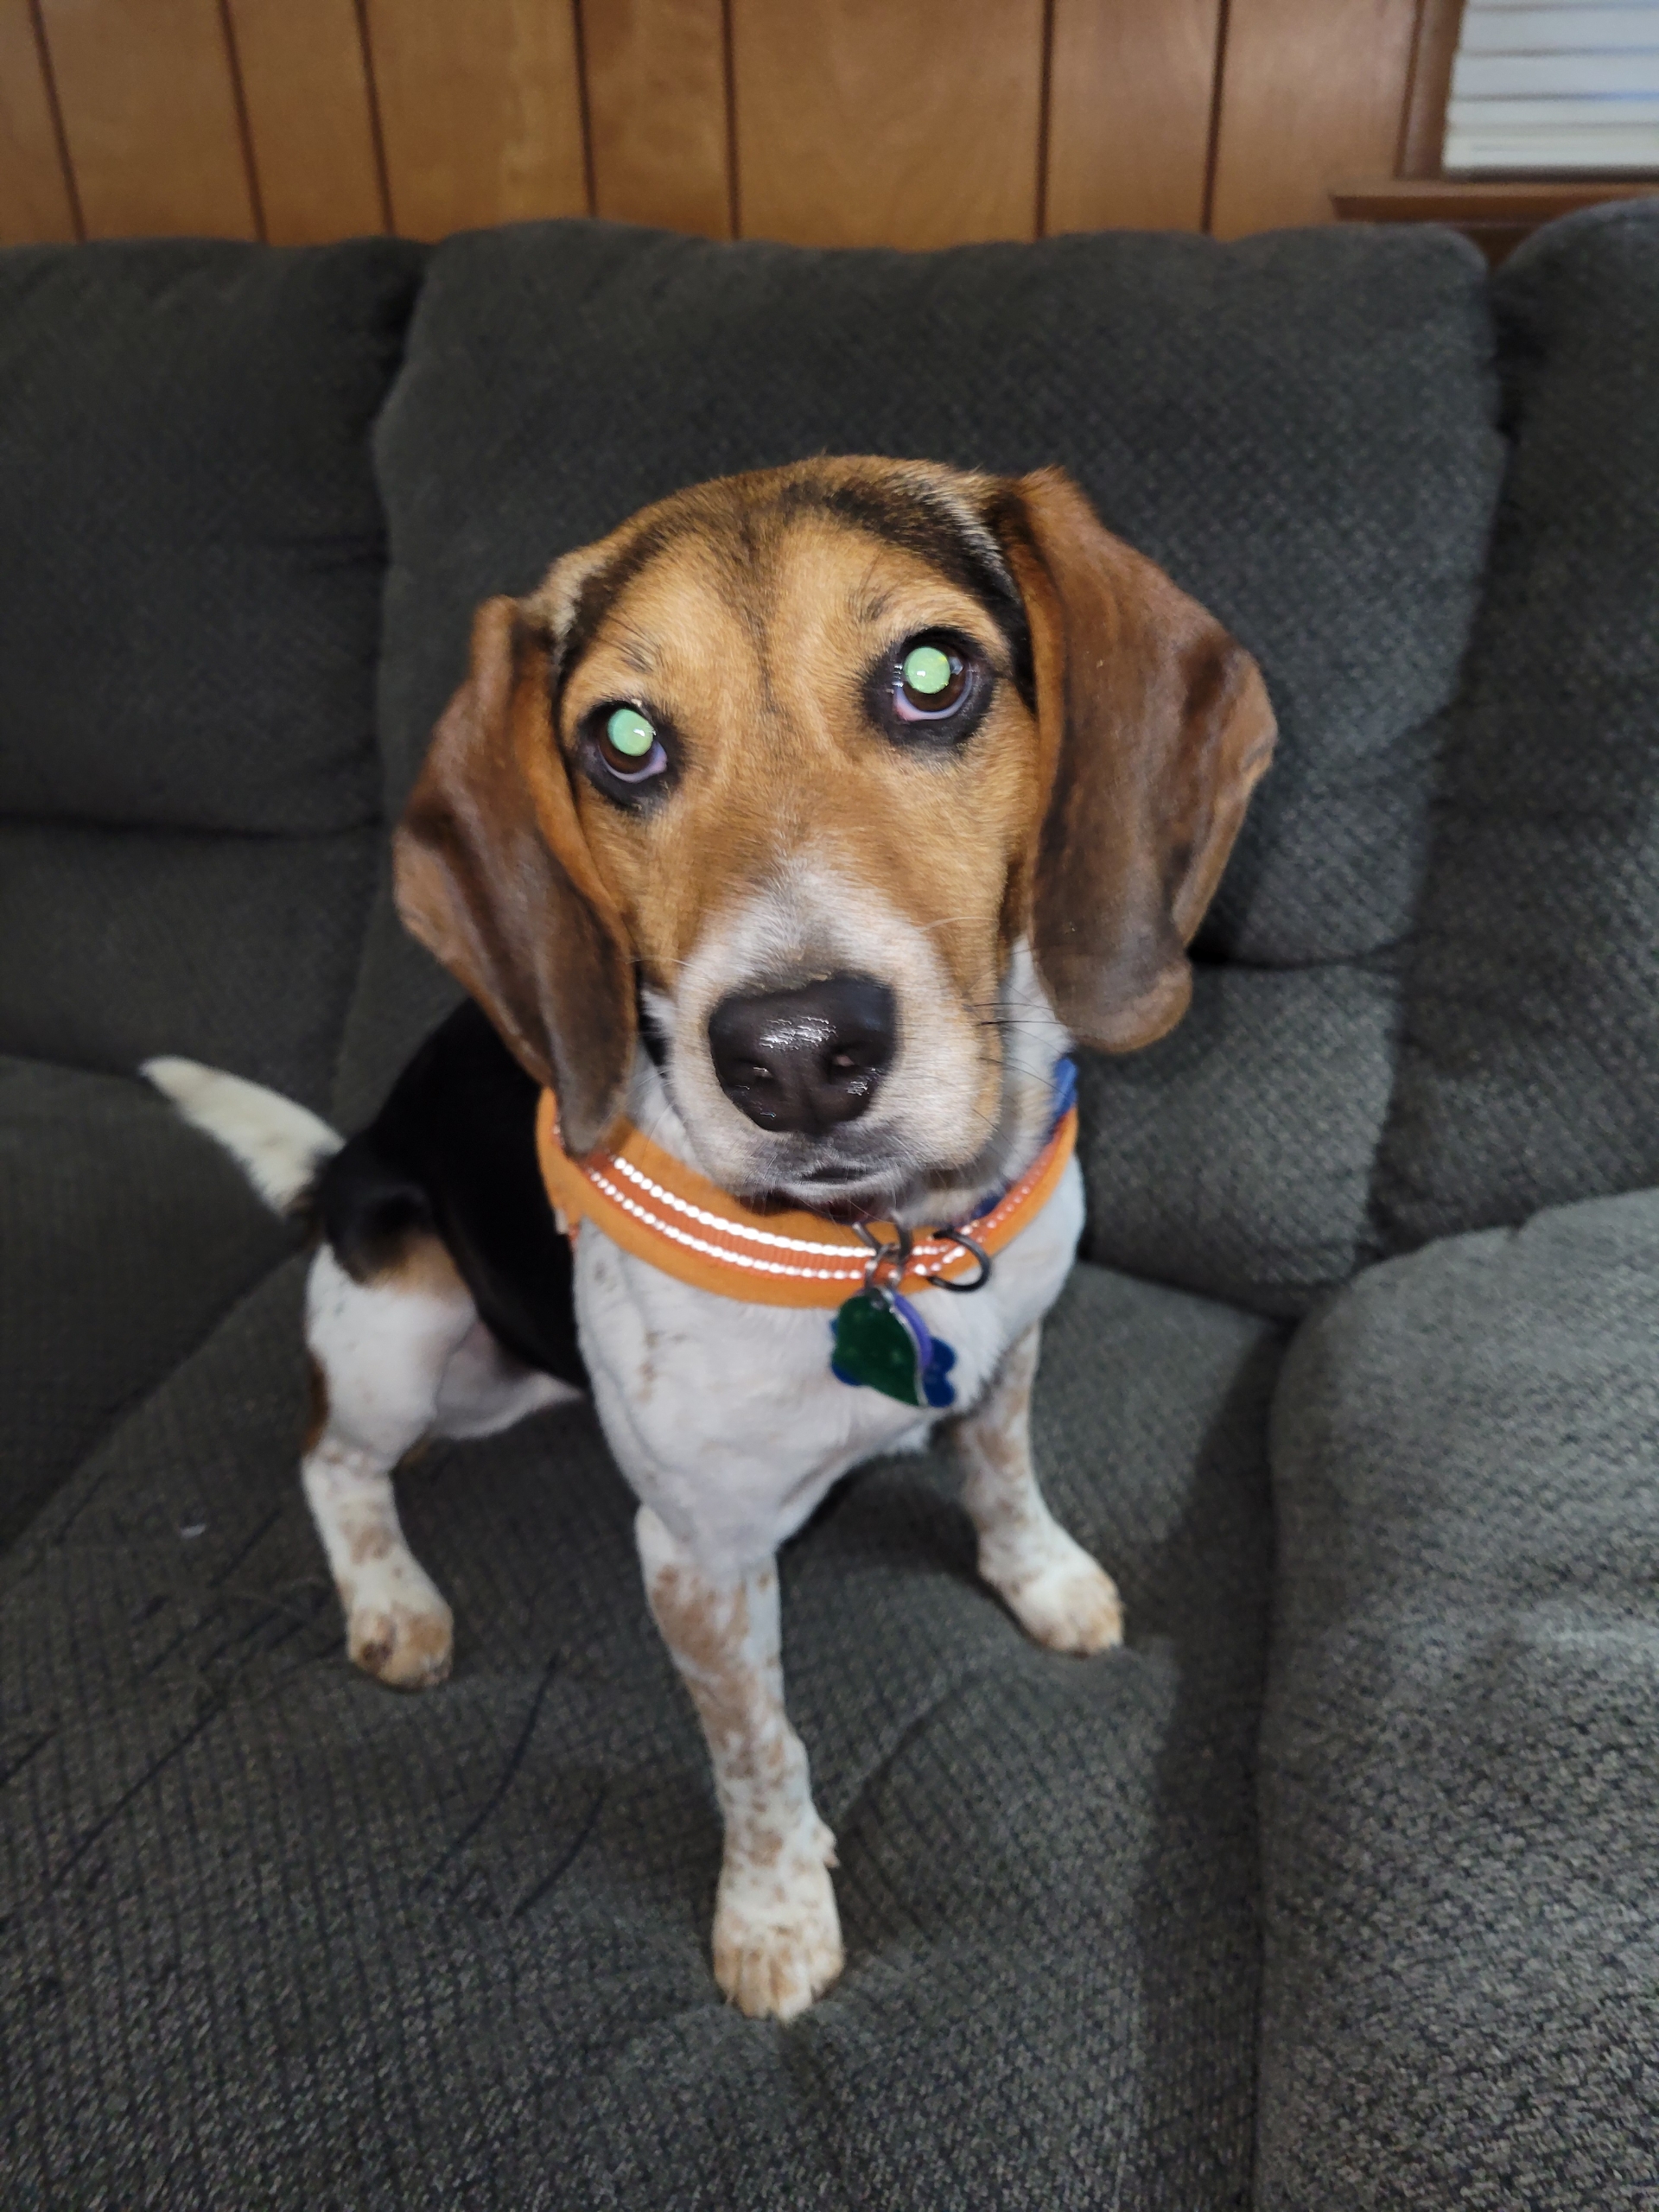 Beagle Rescue of Southern Maryland